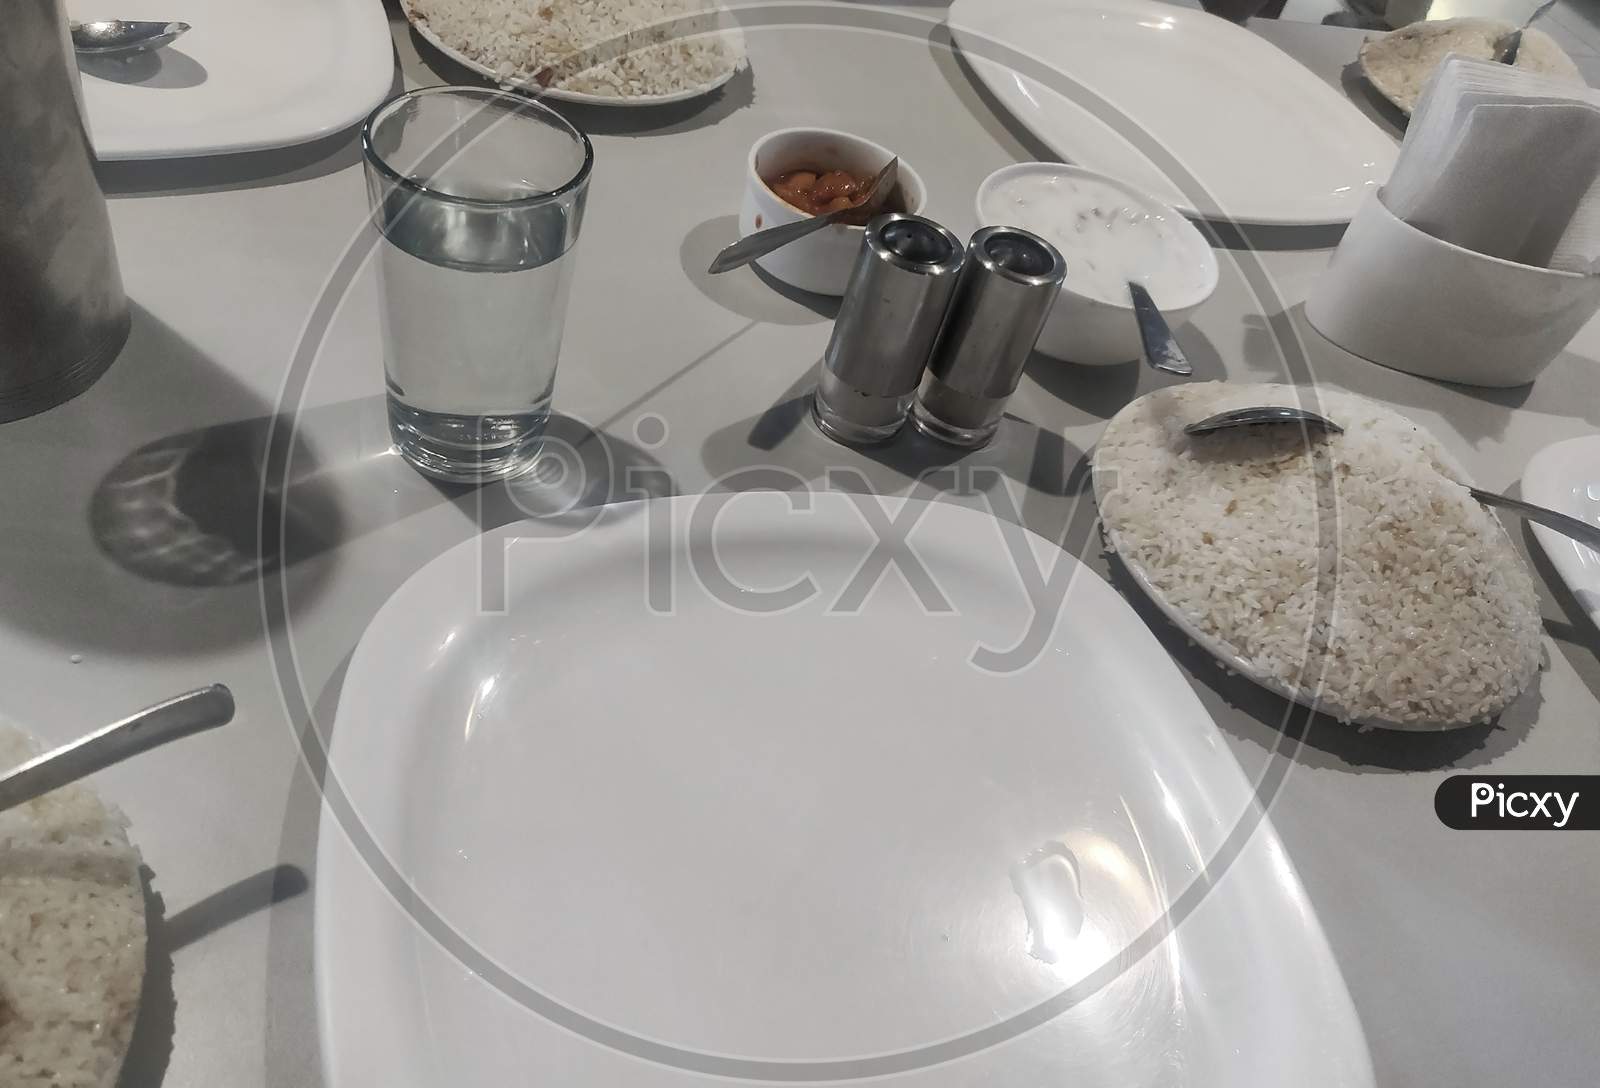 Culinary Set On A Table With Food (Rice And Pickle).